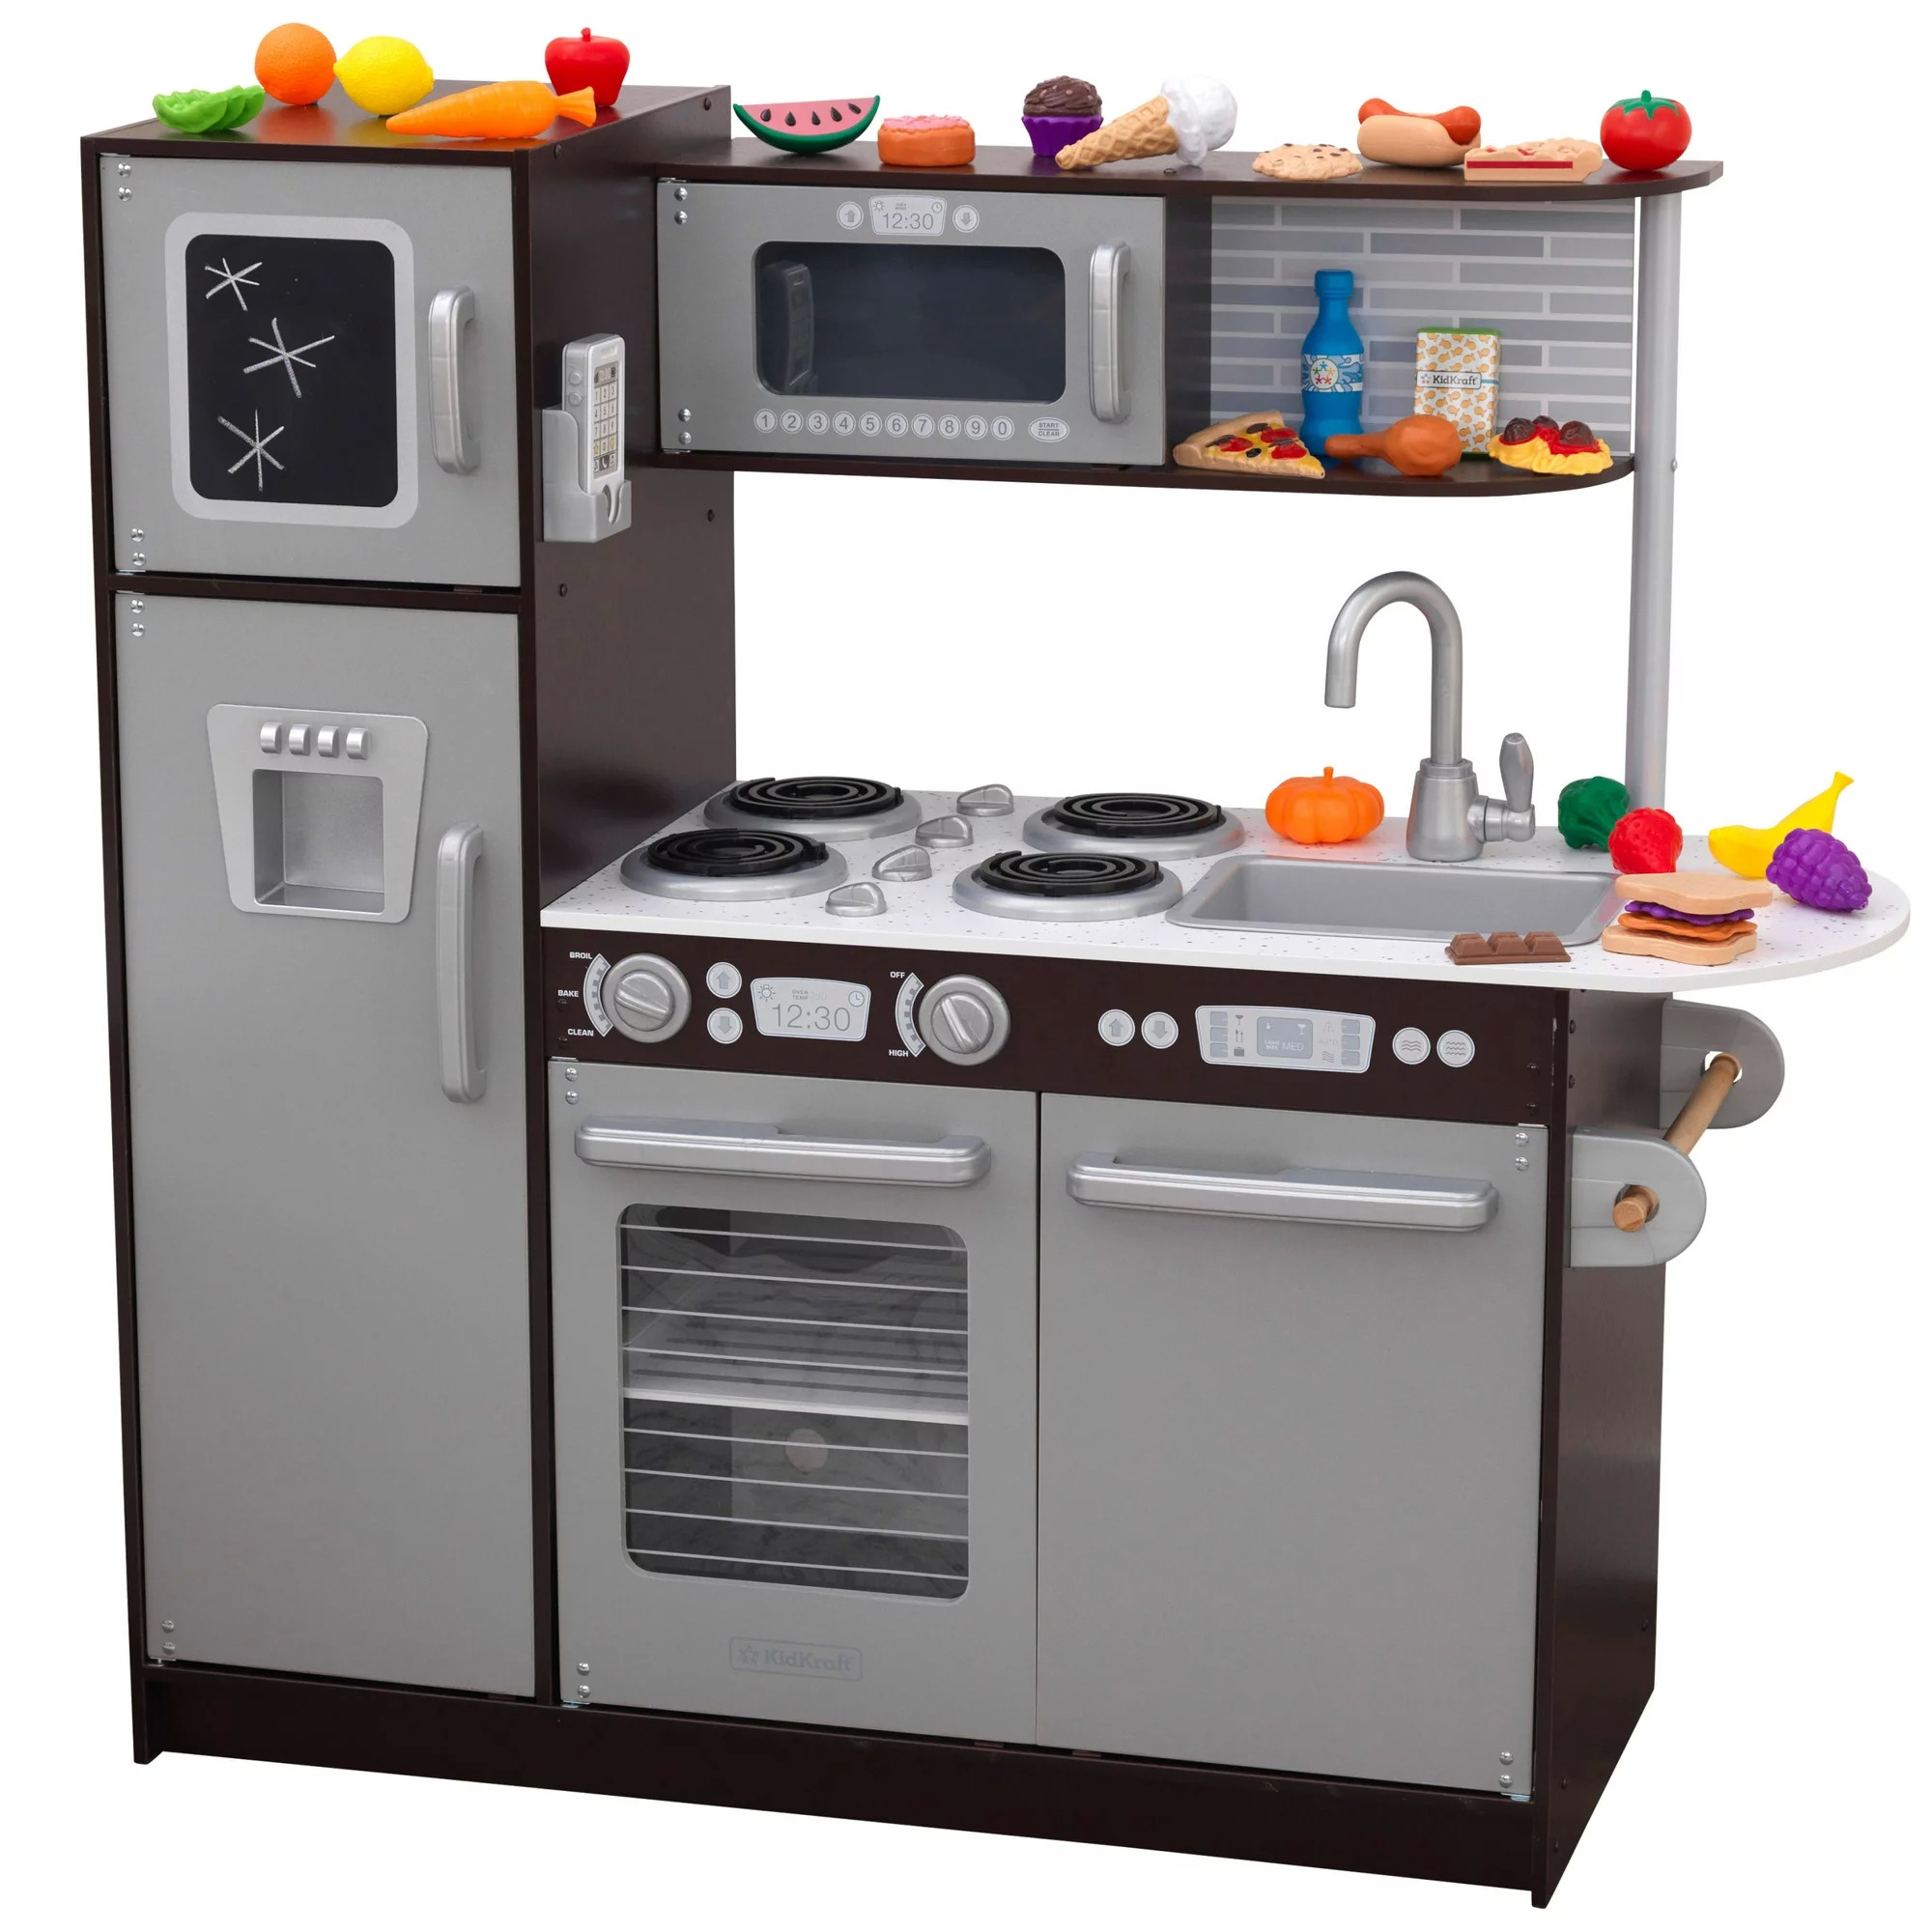 Kidkraft Uptown Wooden 30-Piece Play Kitchen for Kids, Black and Silver $99